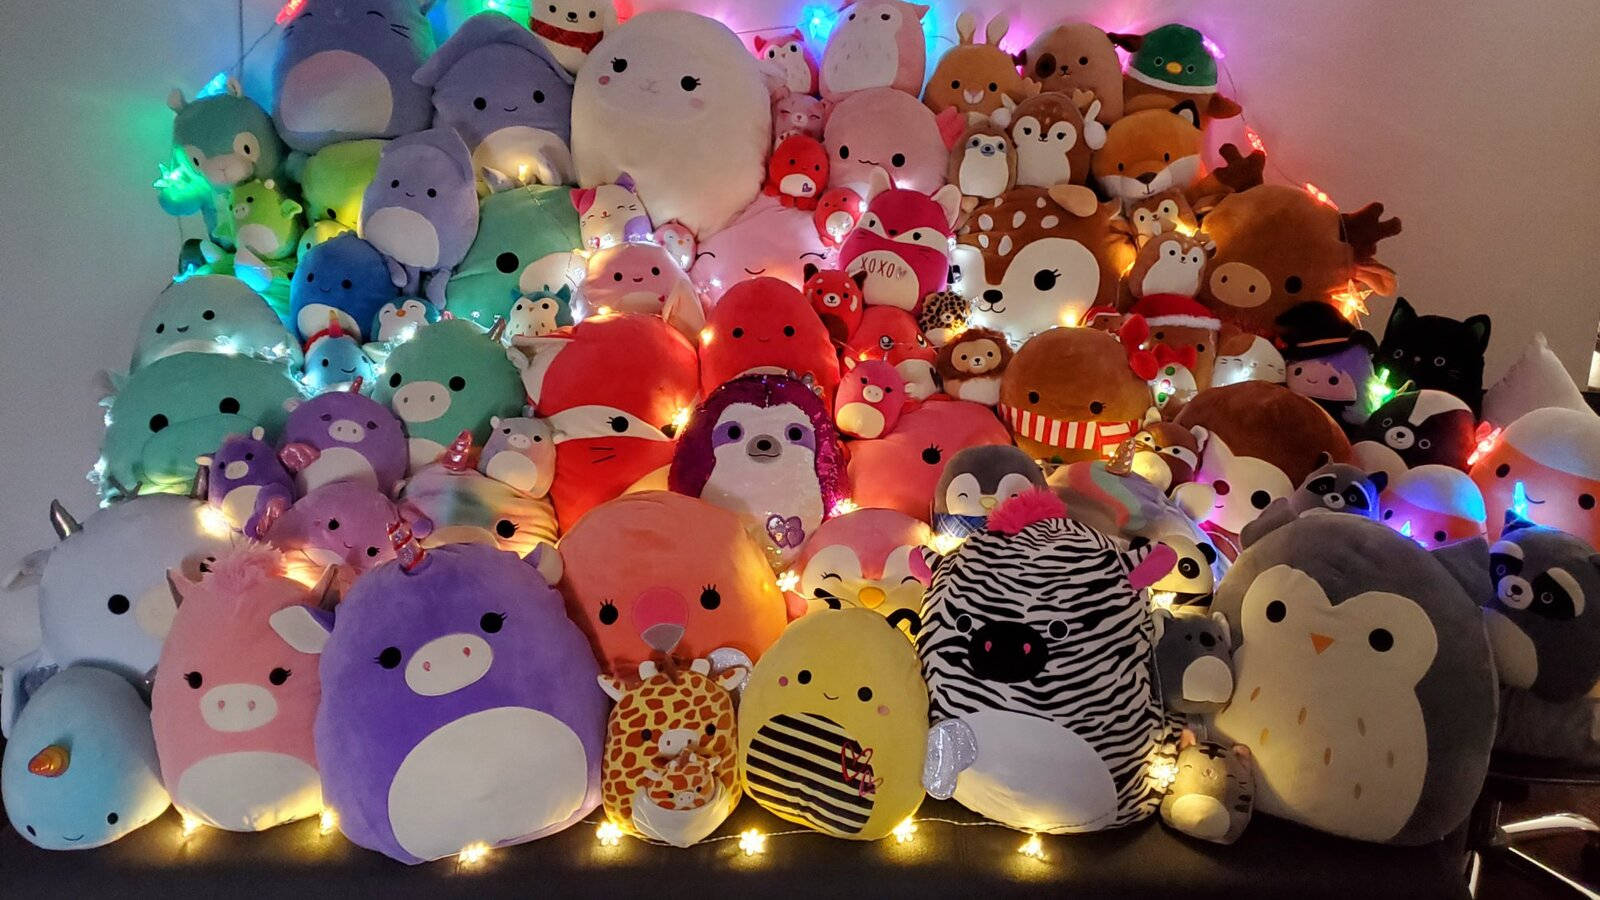 Caption: Vibrant Collection of Playful Squishmallows Wallpaper